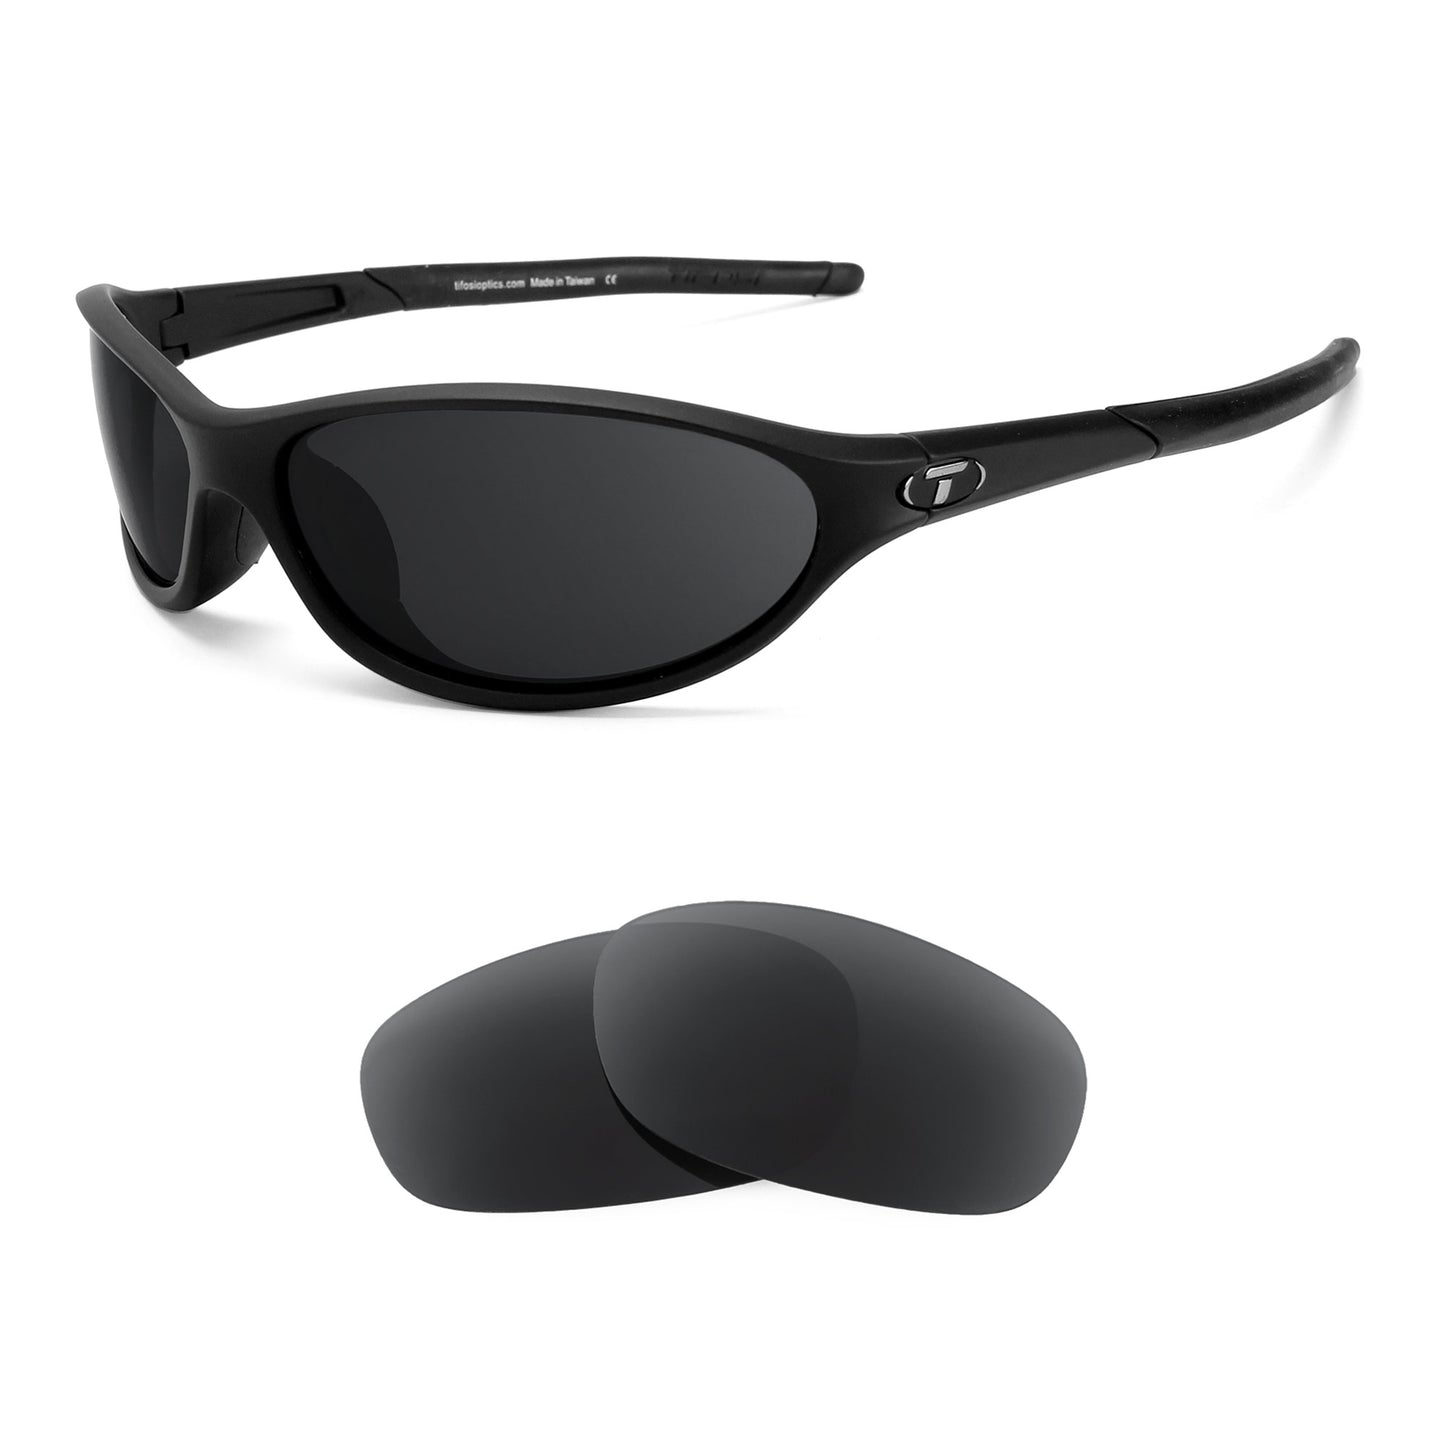 Tifosi Alpe 2.0 sunglasses with replacement lenses